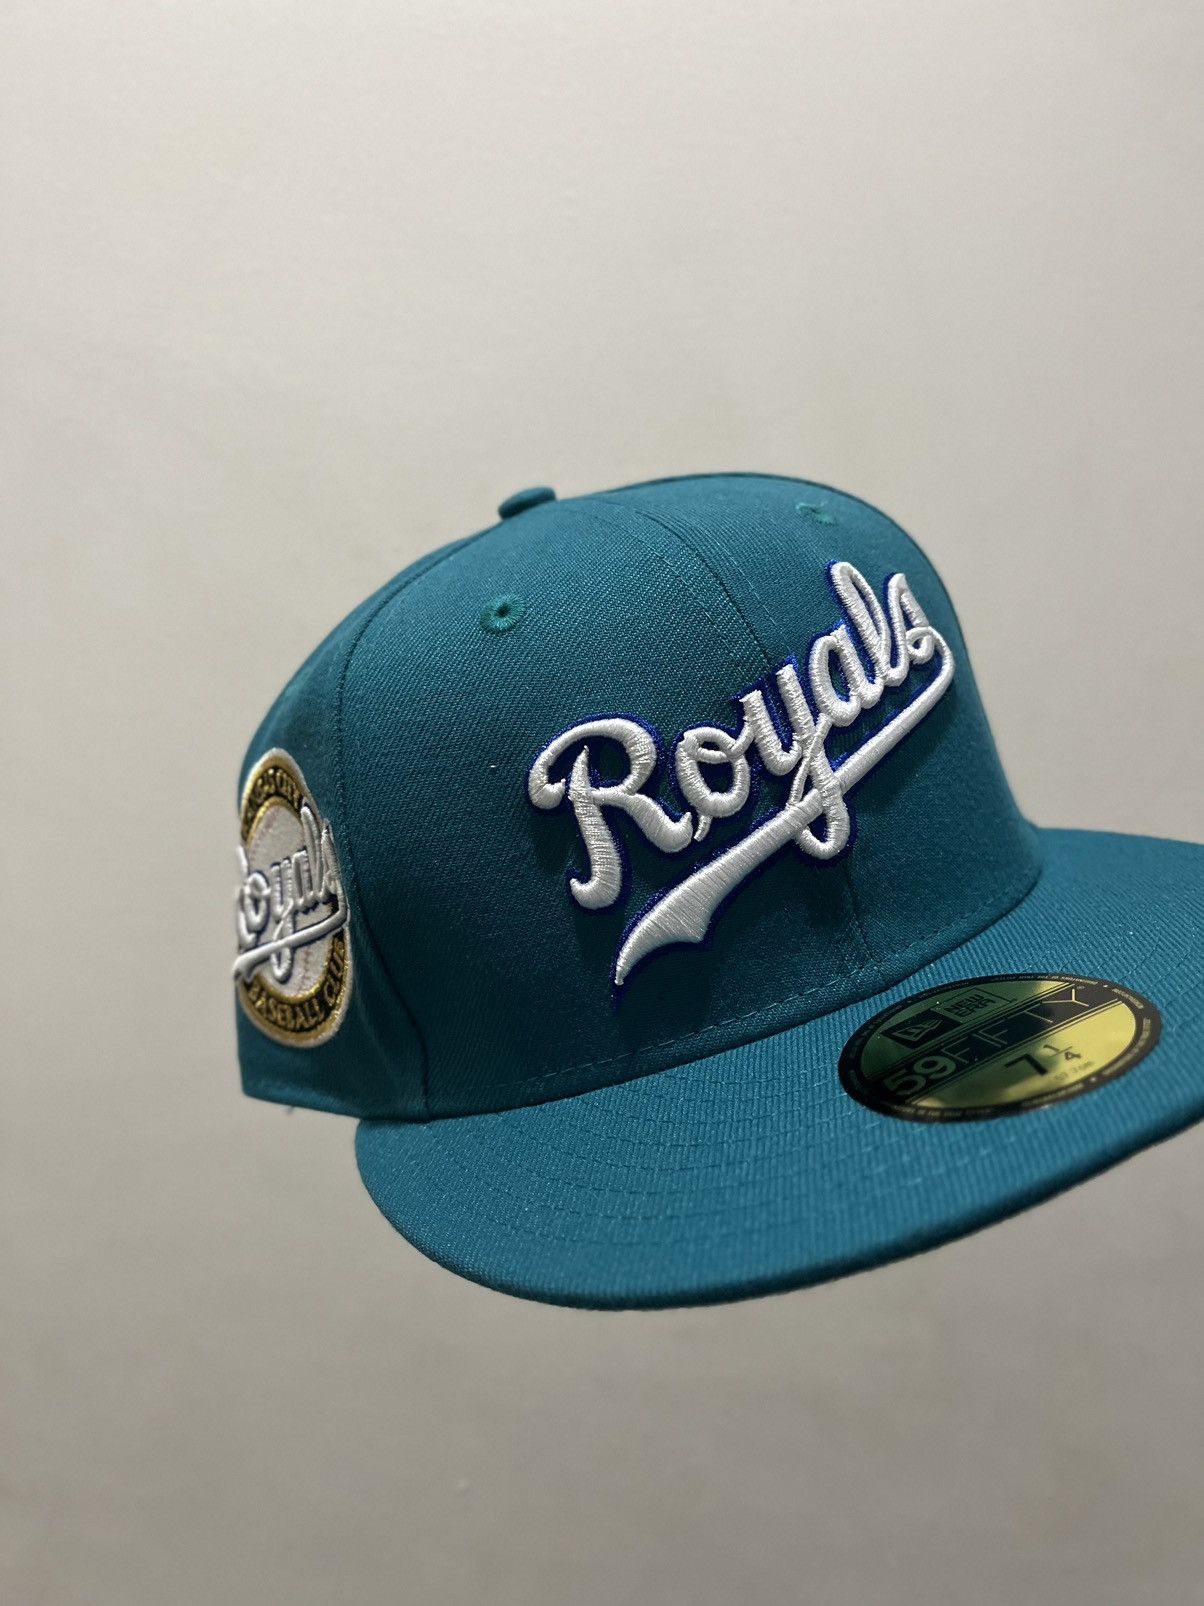 Exclusive New Era Kansas City Royals Fitted Hat MLB Club Size 7 3/8 2tone  script